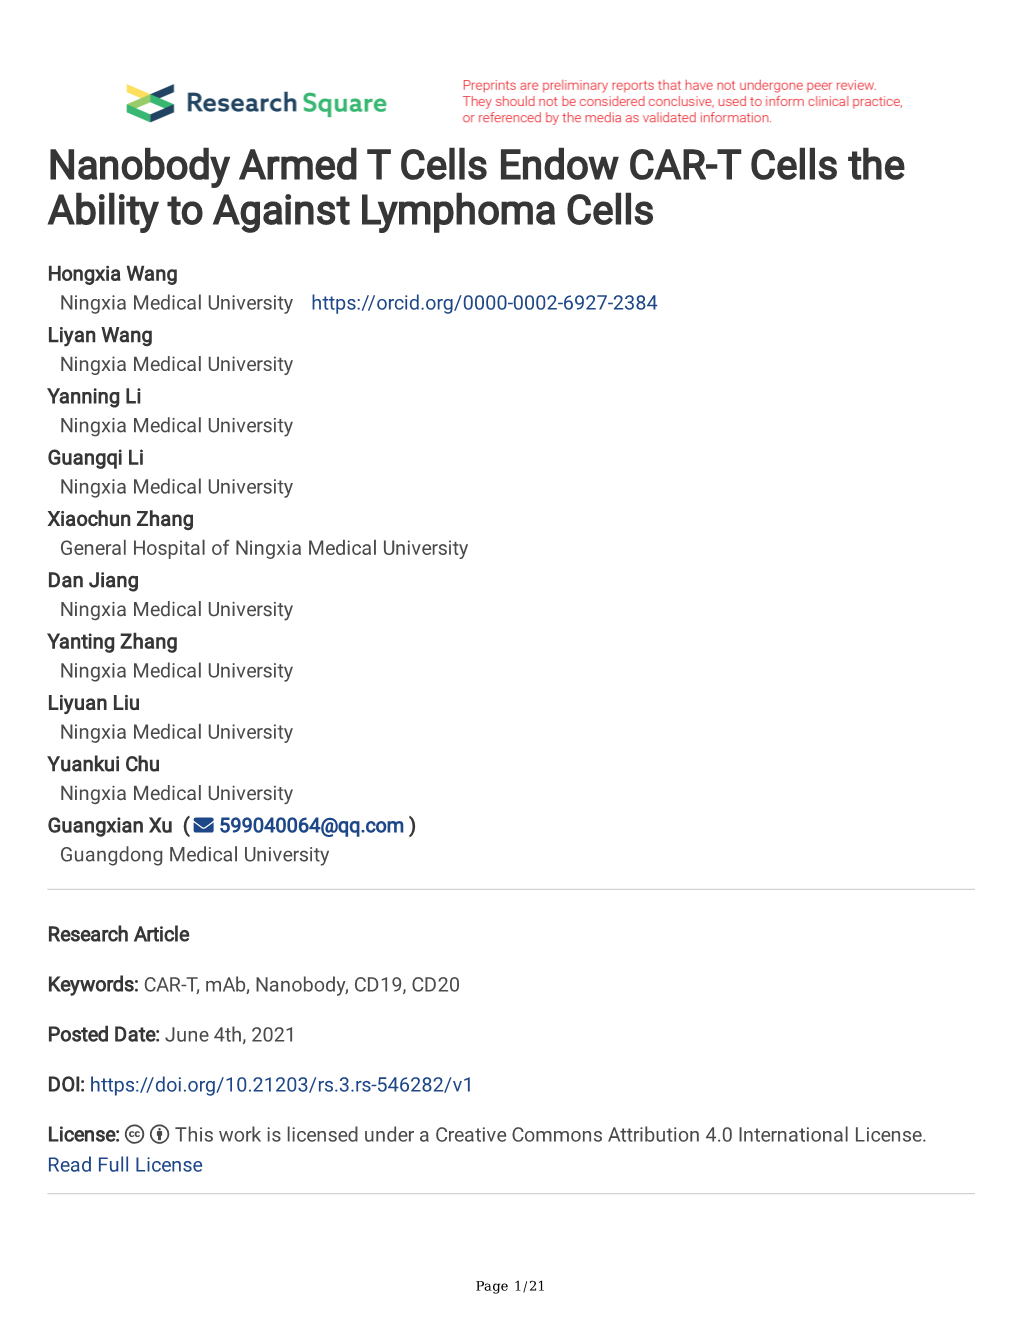 Nanobody Armed T Cells Endow CAR-T Cells the Ability to Against Lymphoma Cells